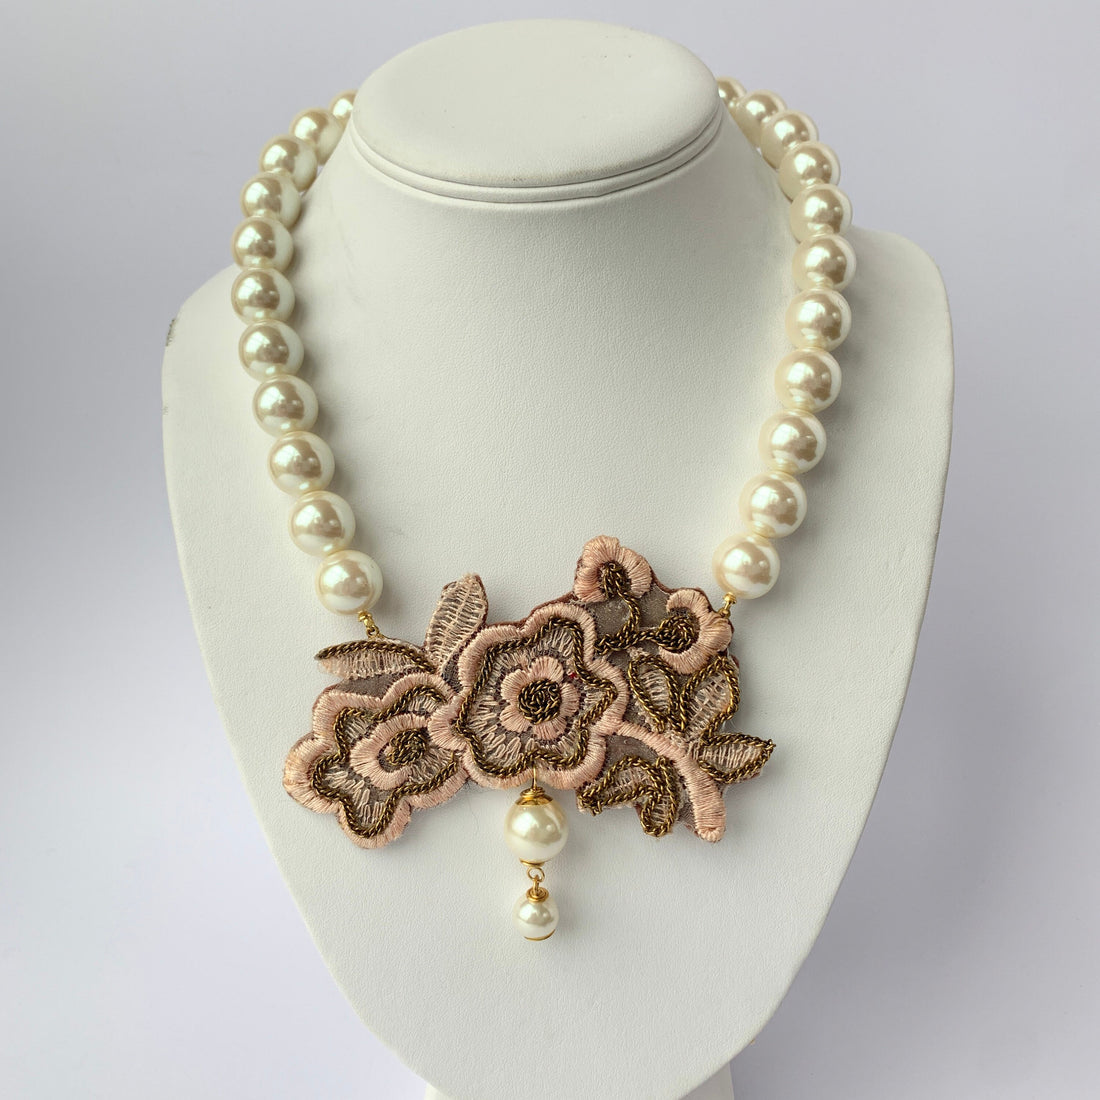 Lenora Dame Silk Pearl and Chain Bib Necklace